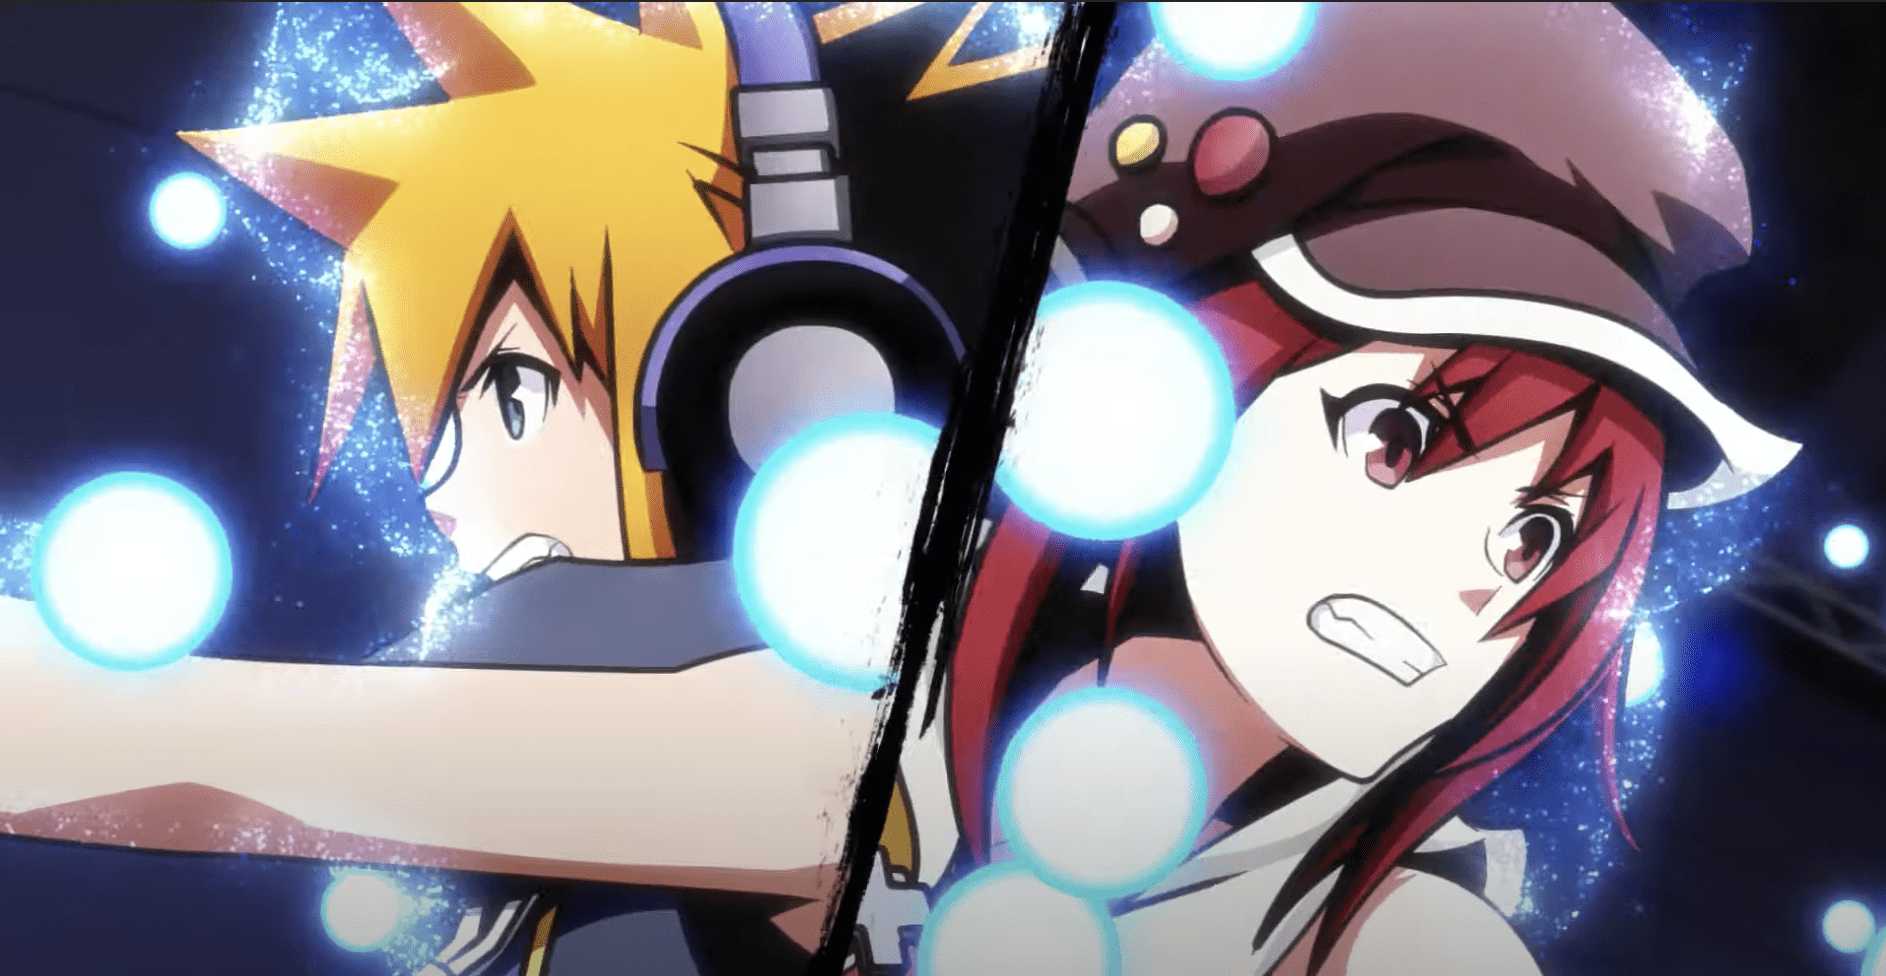 The World Ends With You, anime, April 2021